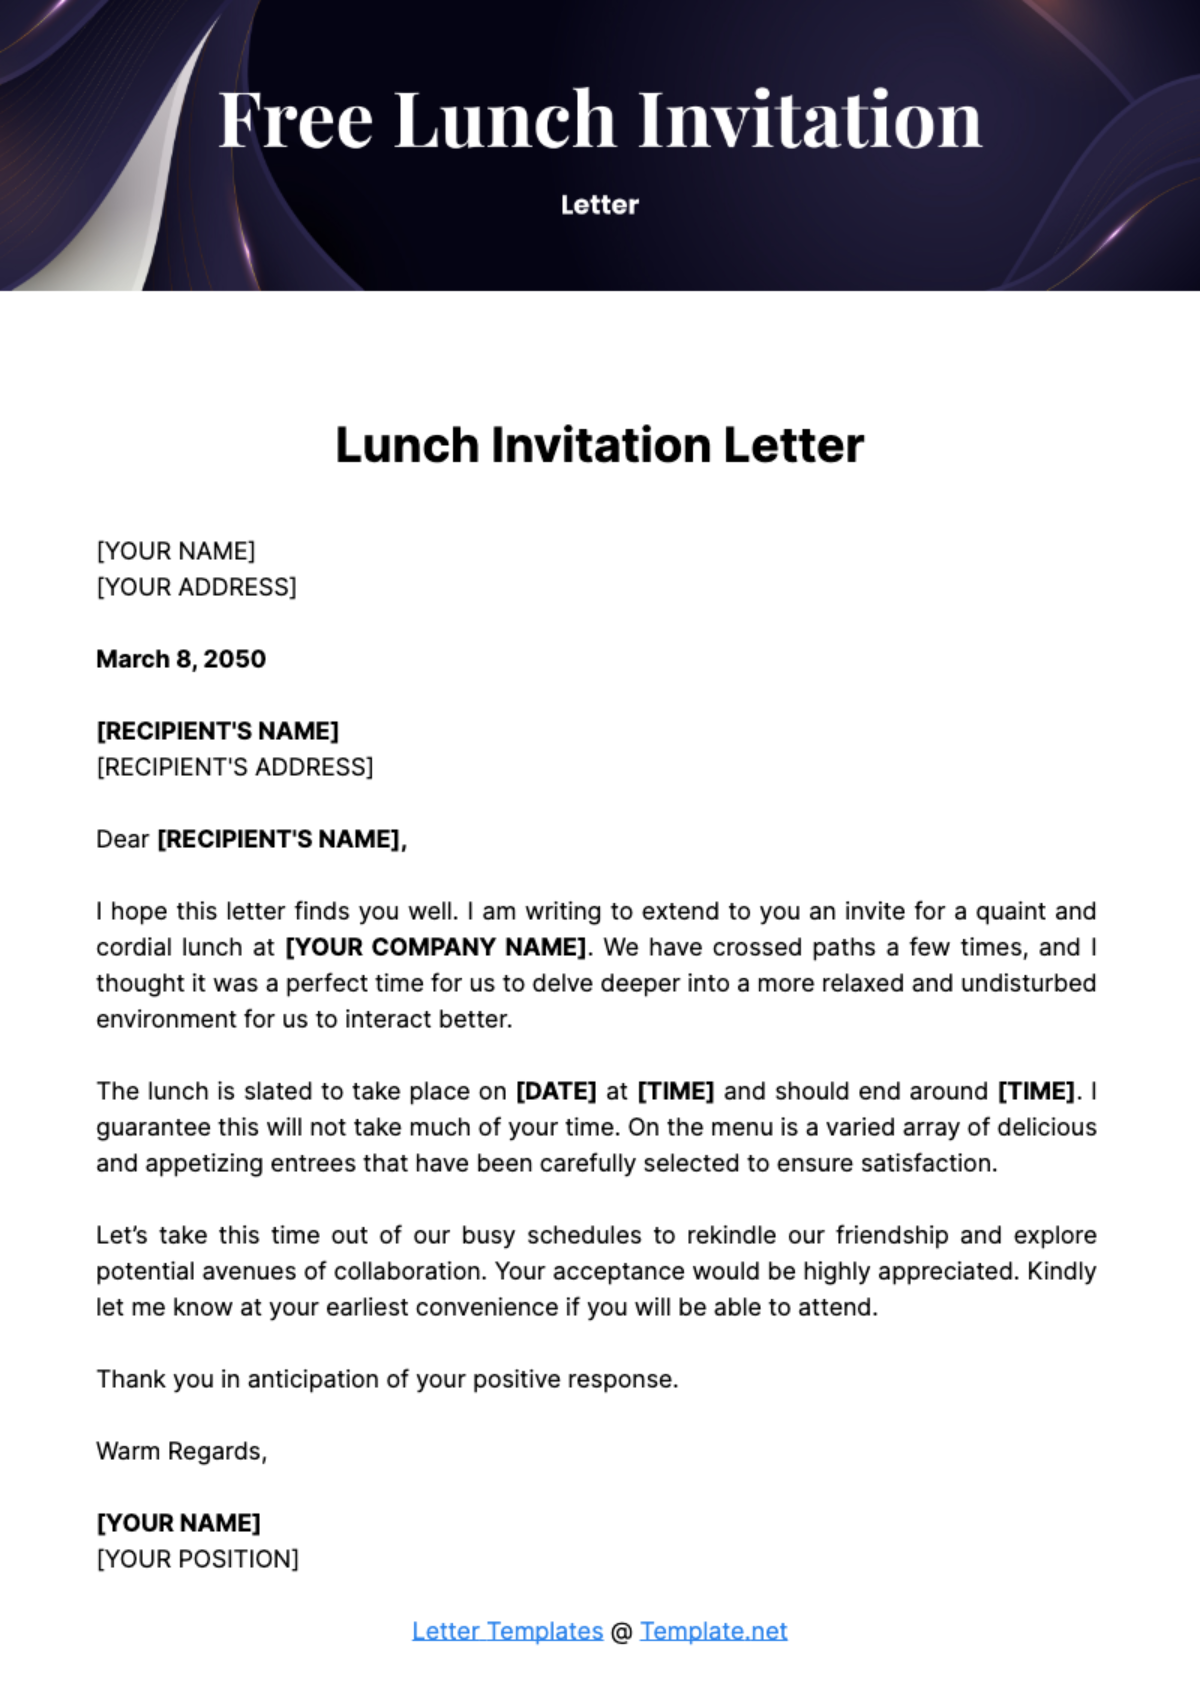 Free Lunch Invitation Letter Template